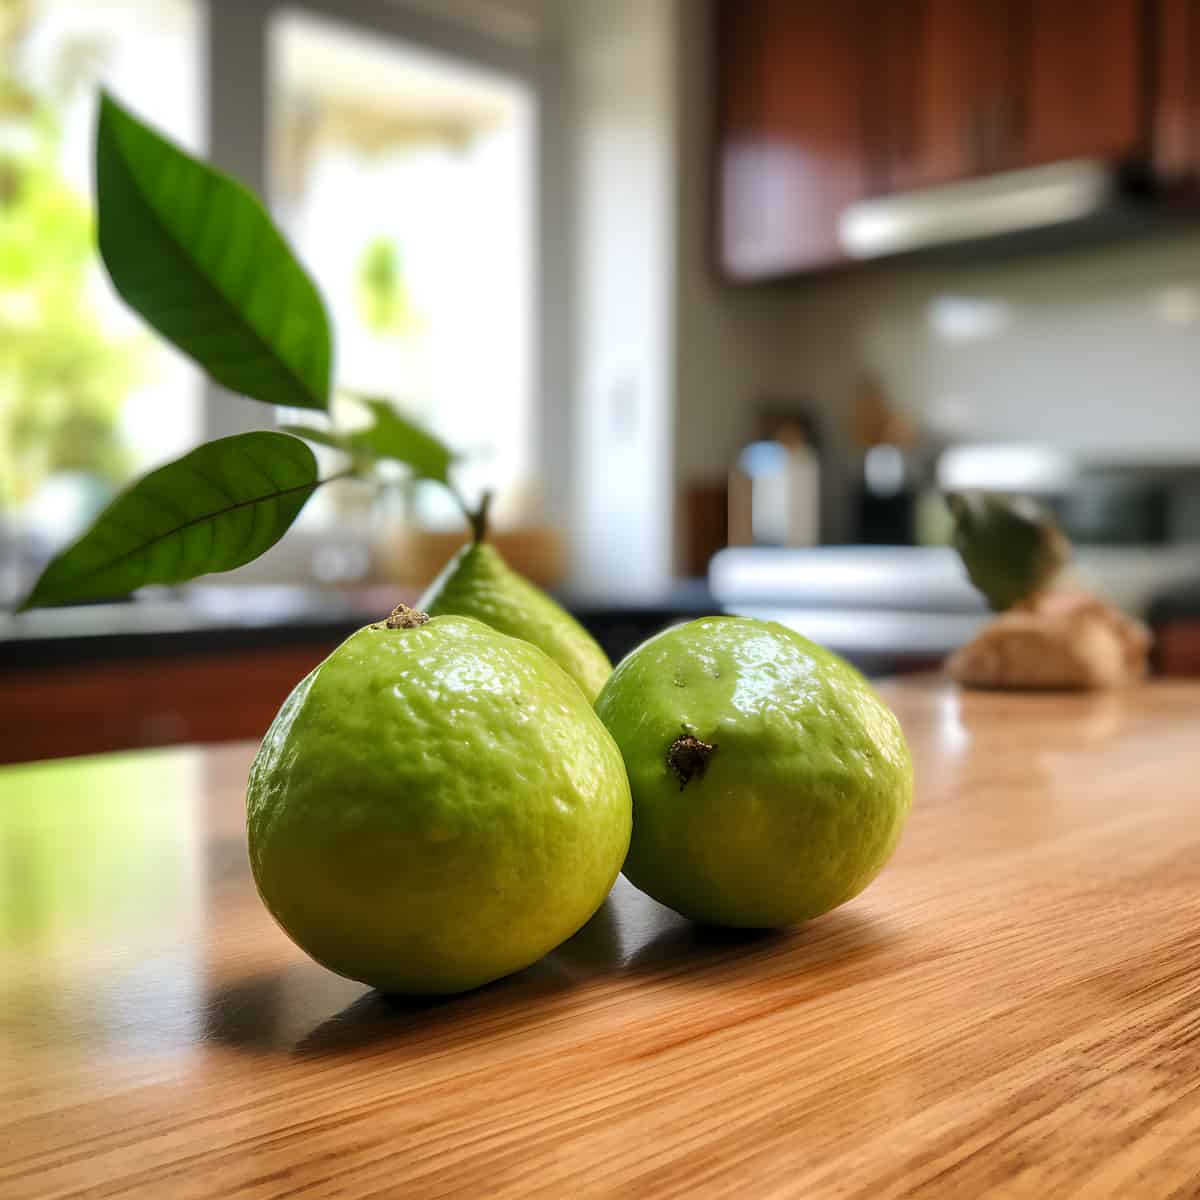 Costa Rican Guava on a kitchen counter